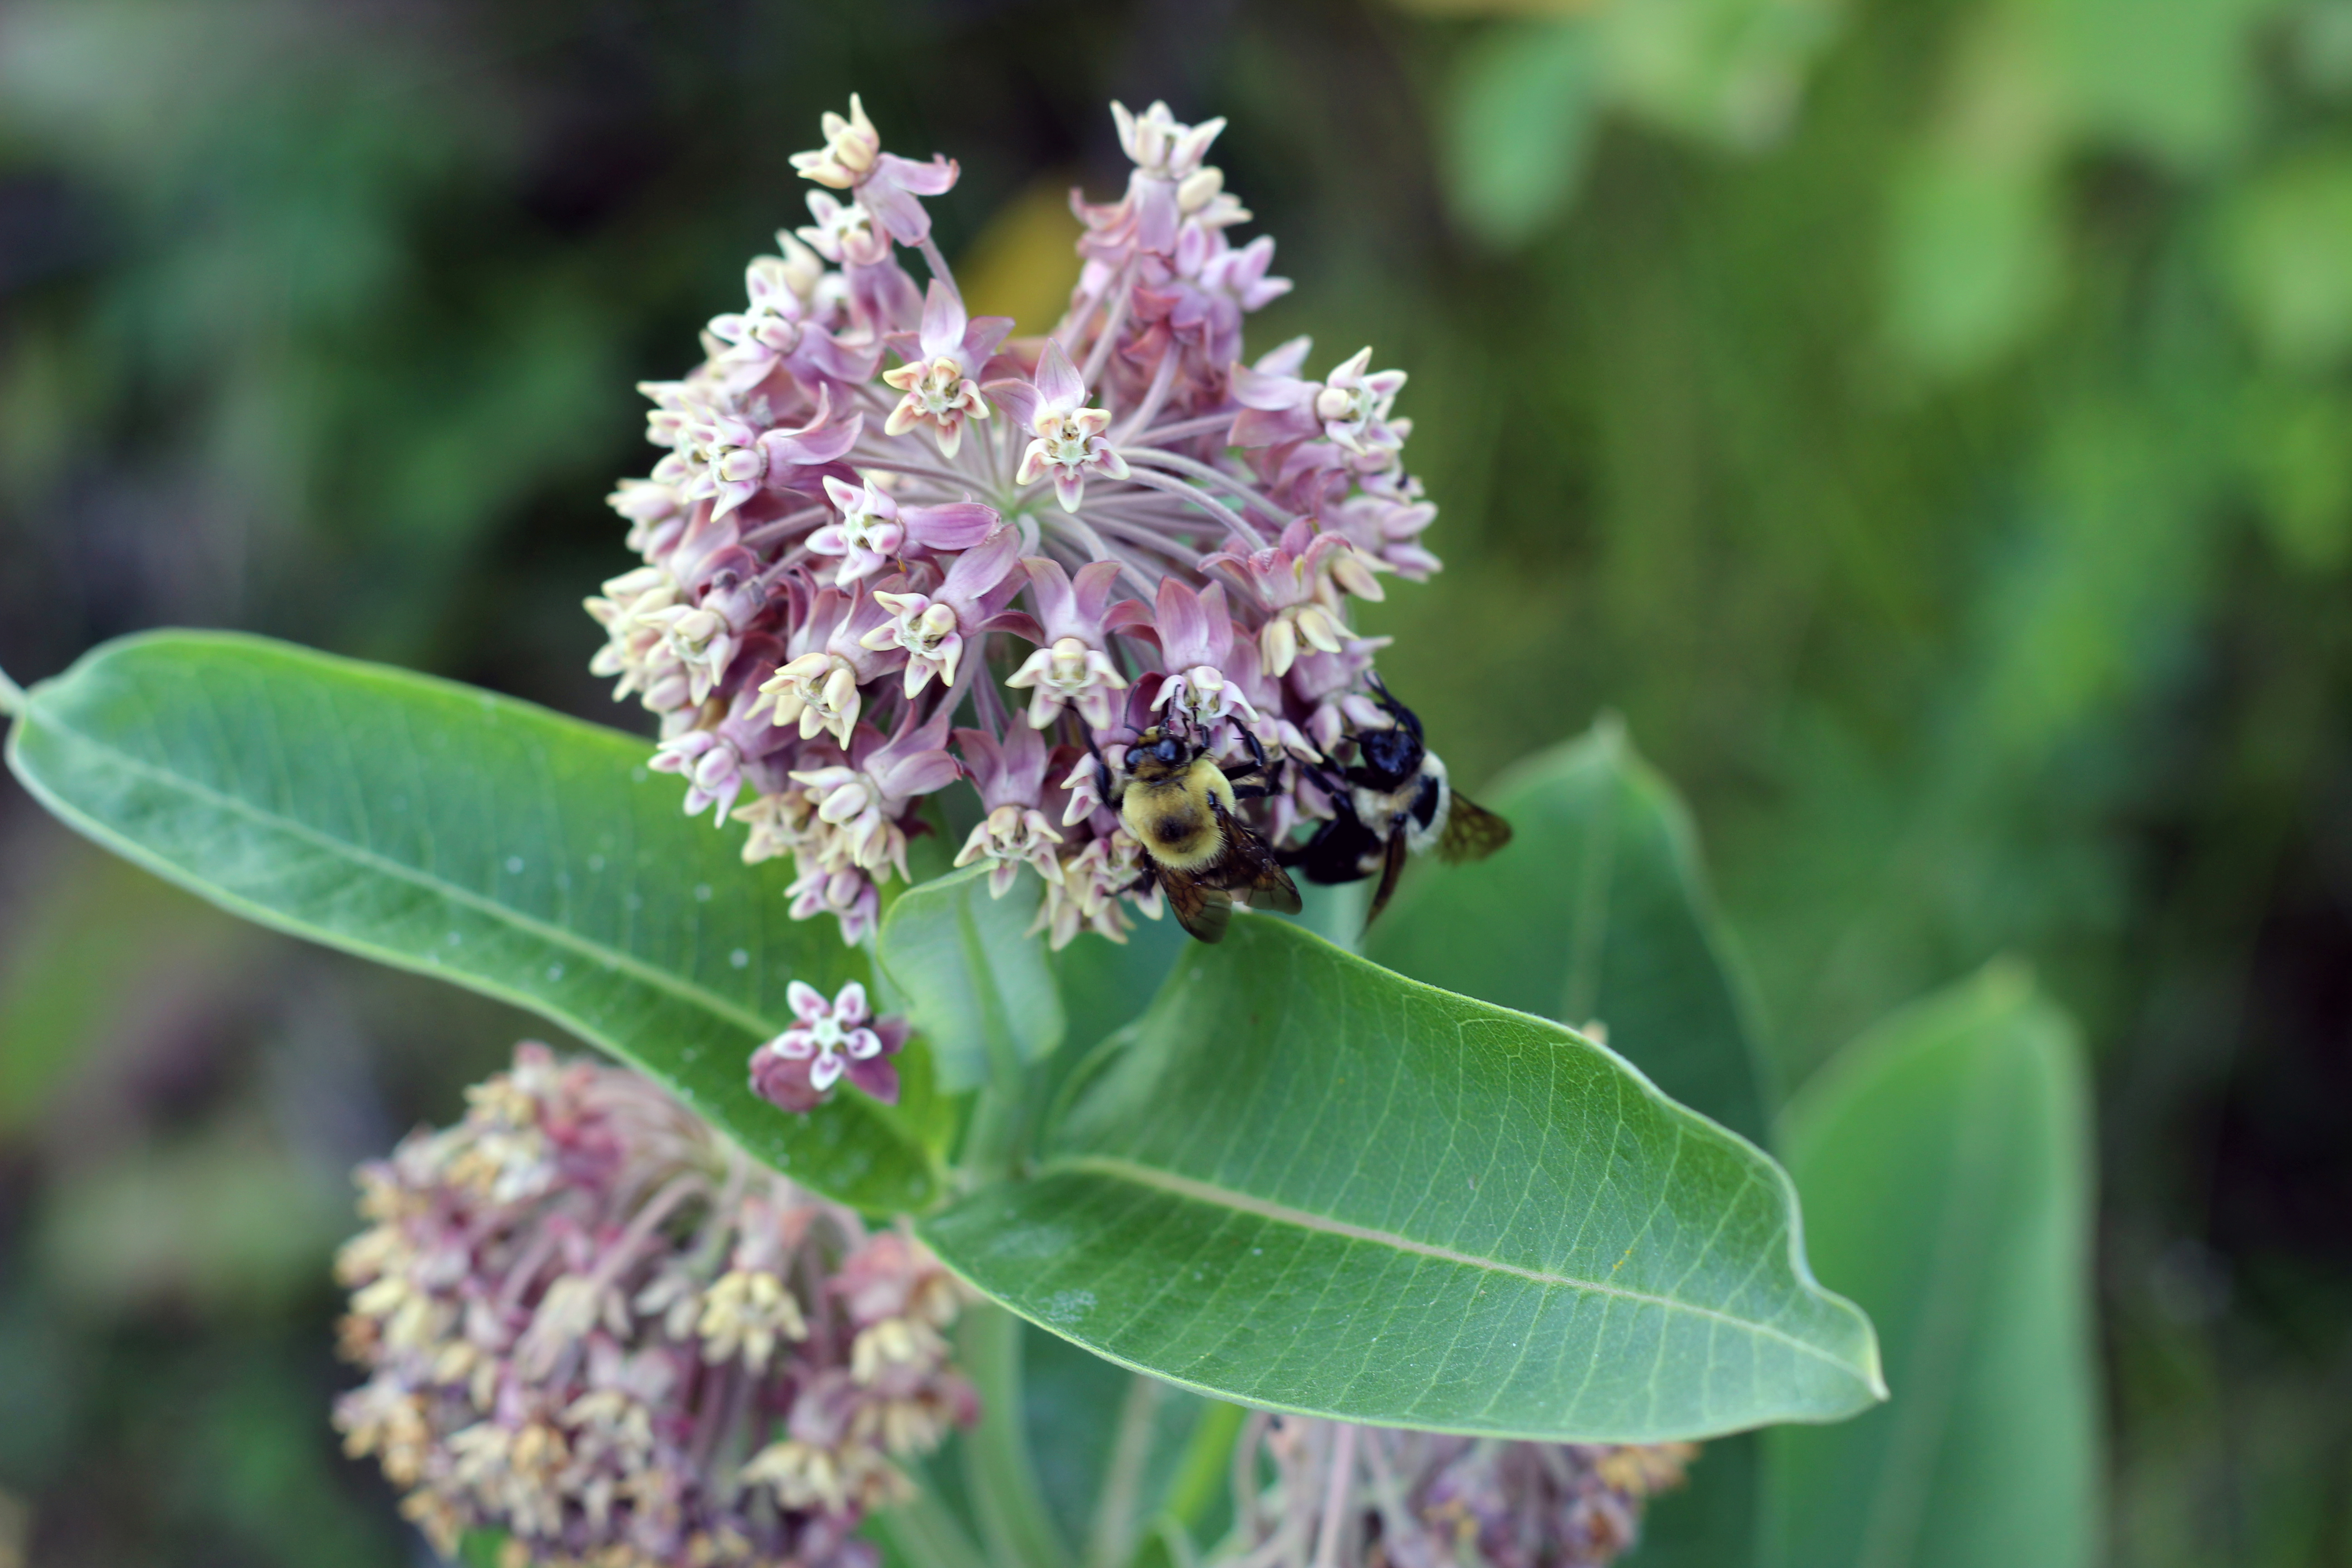 Milkweed - For More Than Monarch Butterflies